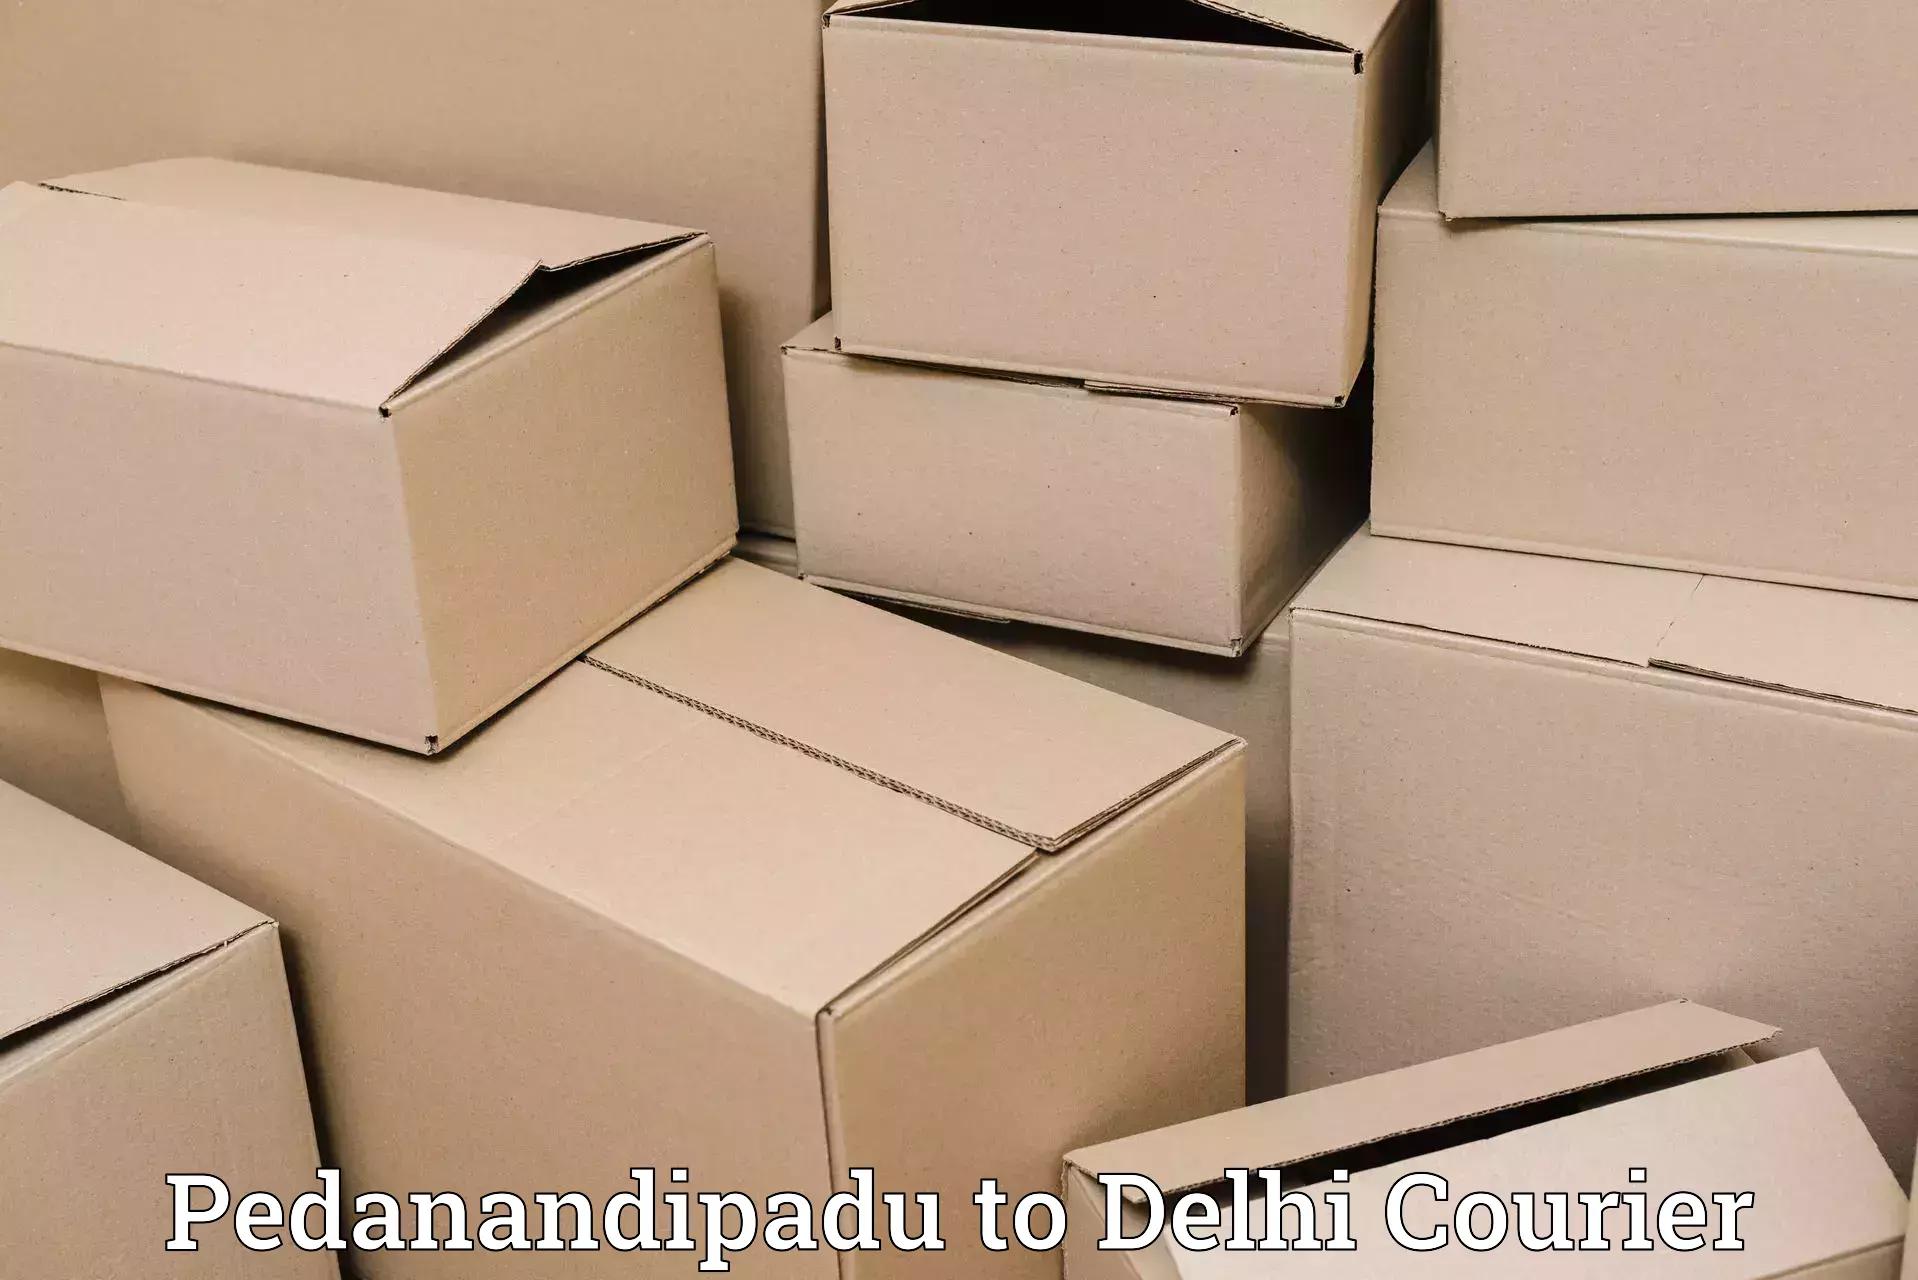 Express delivery capabilities Pedanandipadu to Lodhi Road